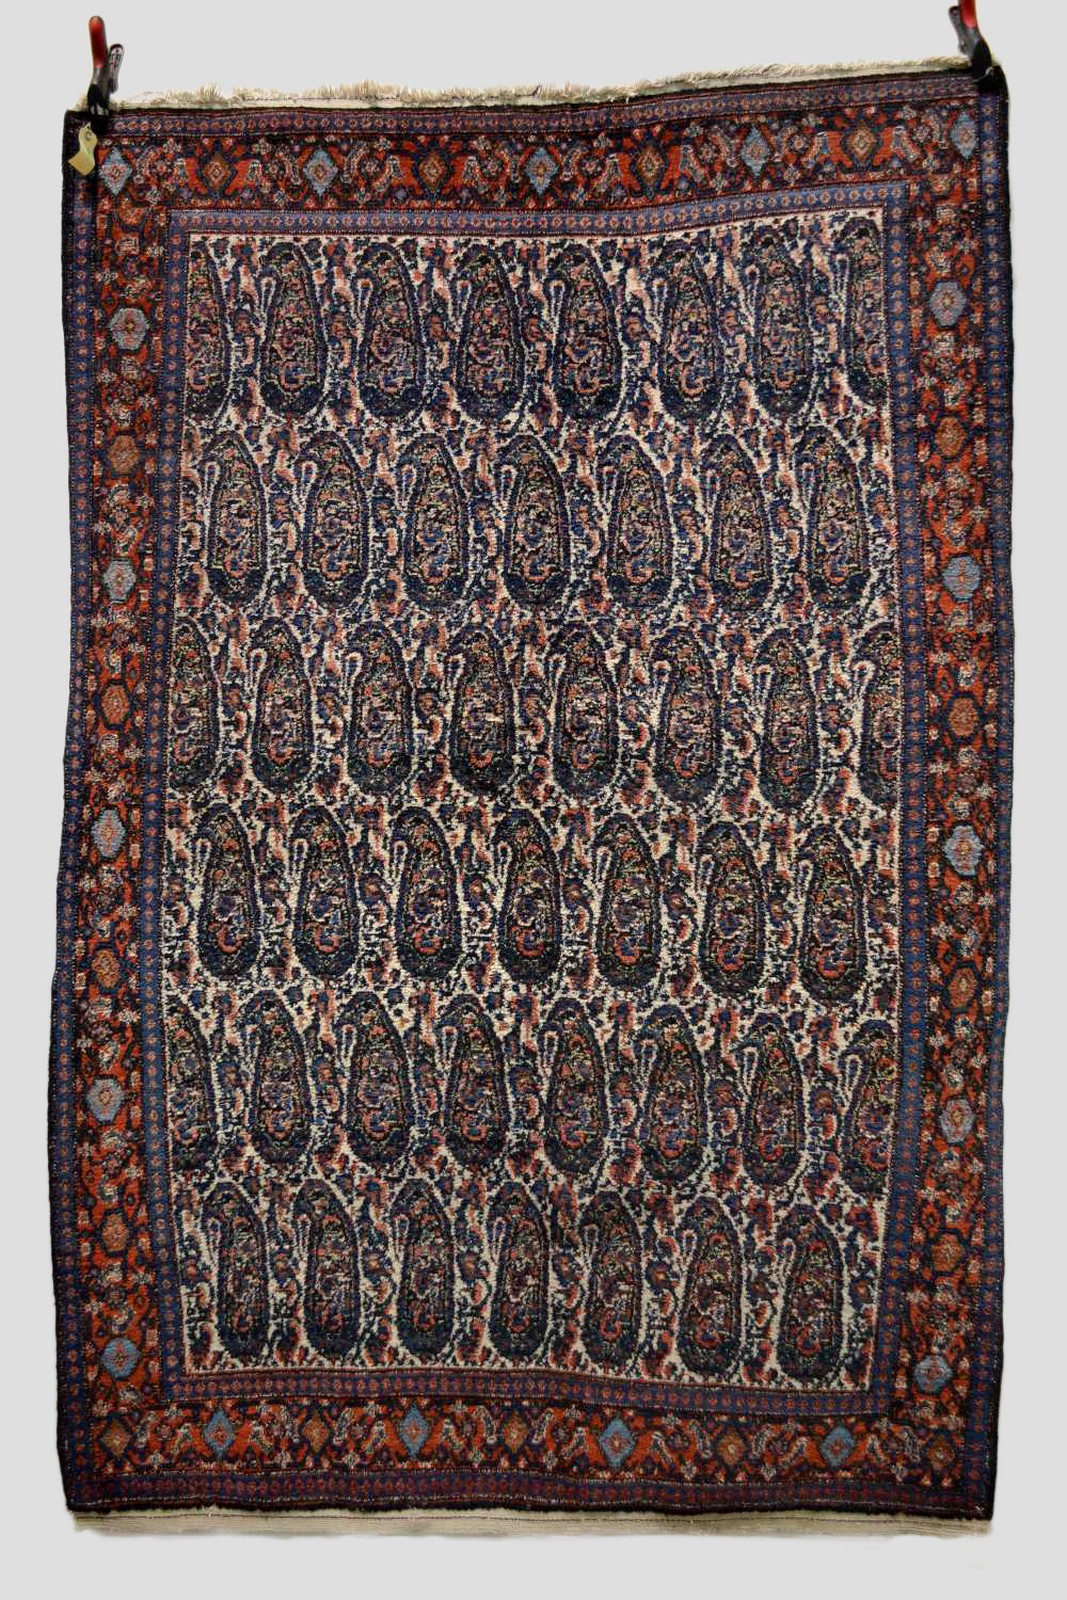 Senneh rug, Hamadan area, north west Persia, mid-20th century, 7ft. x 4ft. 10in. 2.13m. x 1.47m. All